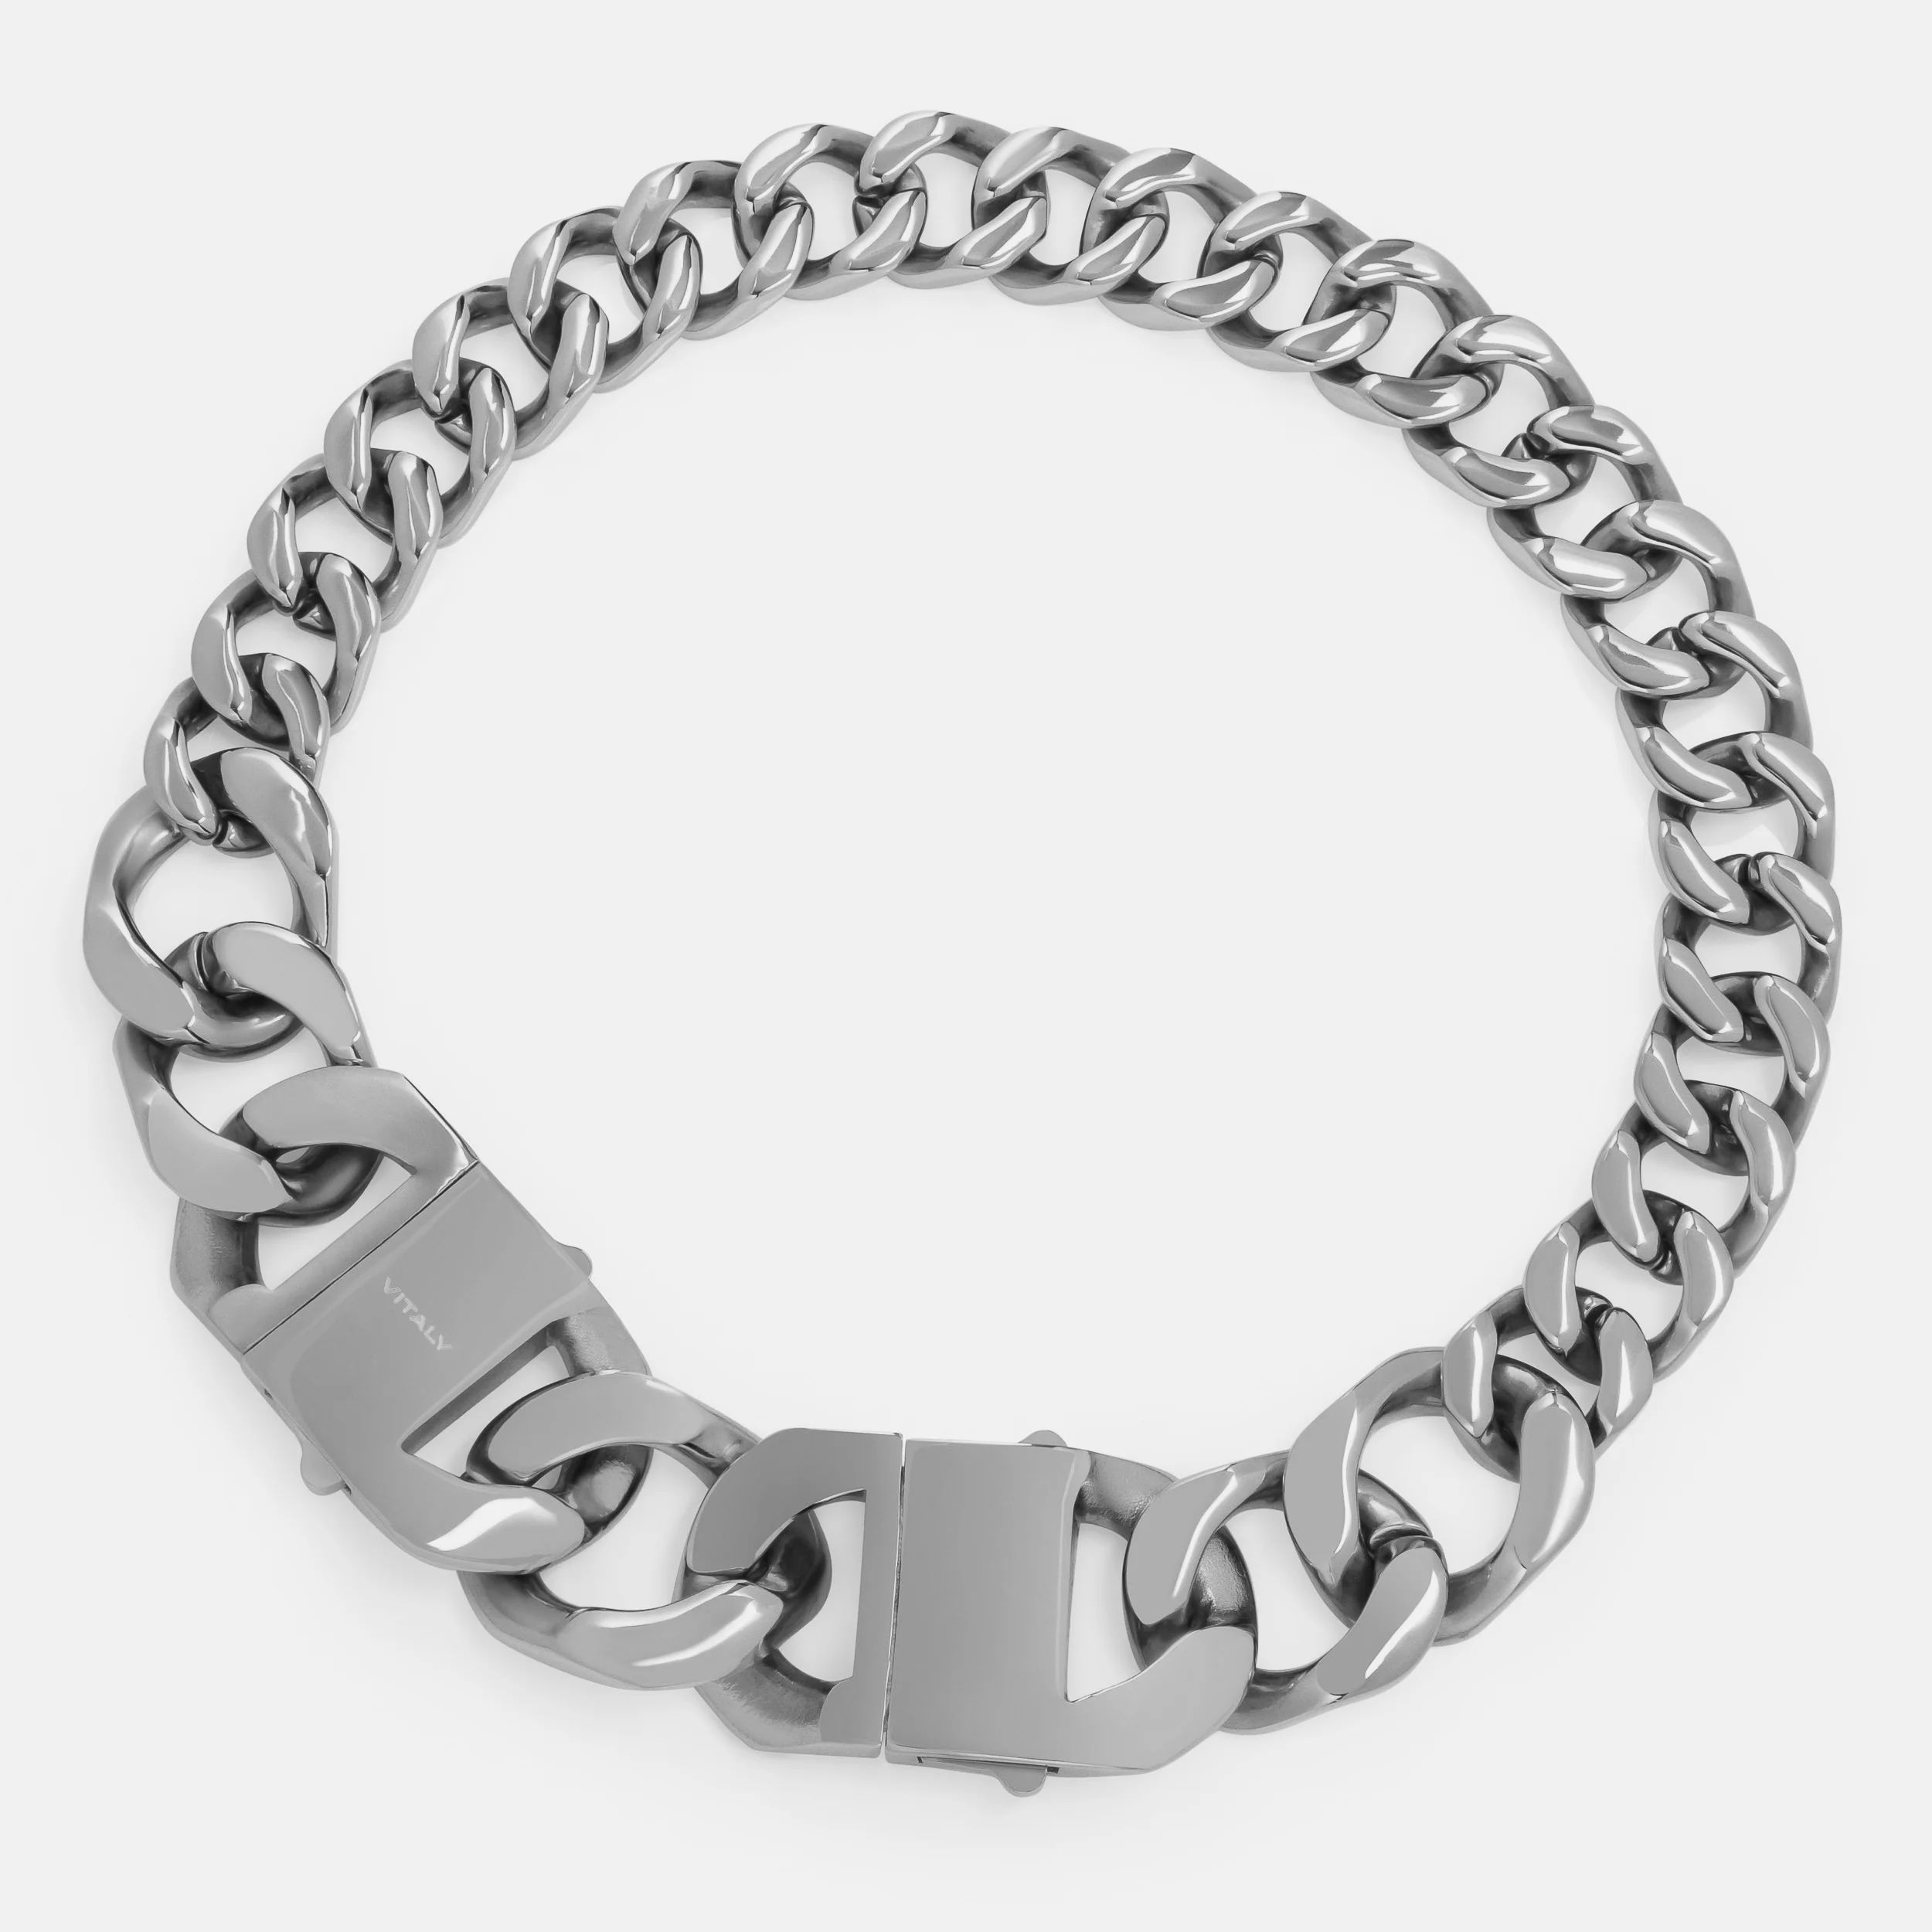 Vitaly Fuse Choker Chain | 100% Recycled Stainless Steel Accessories | Vitaly Design (US)